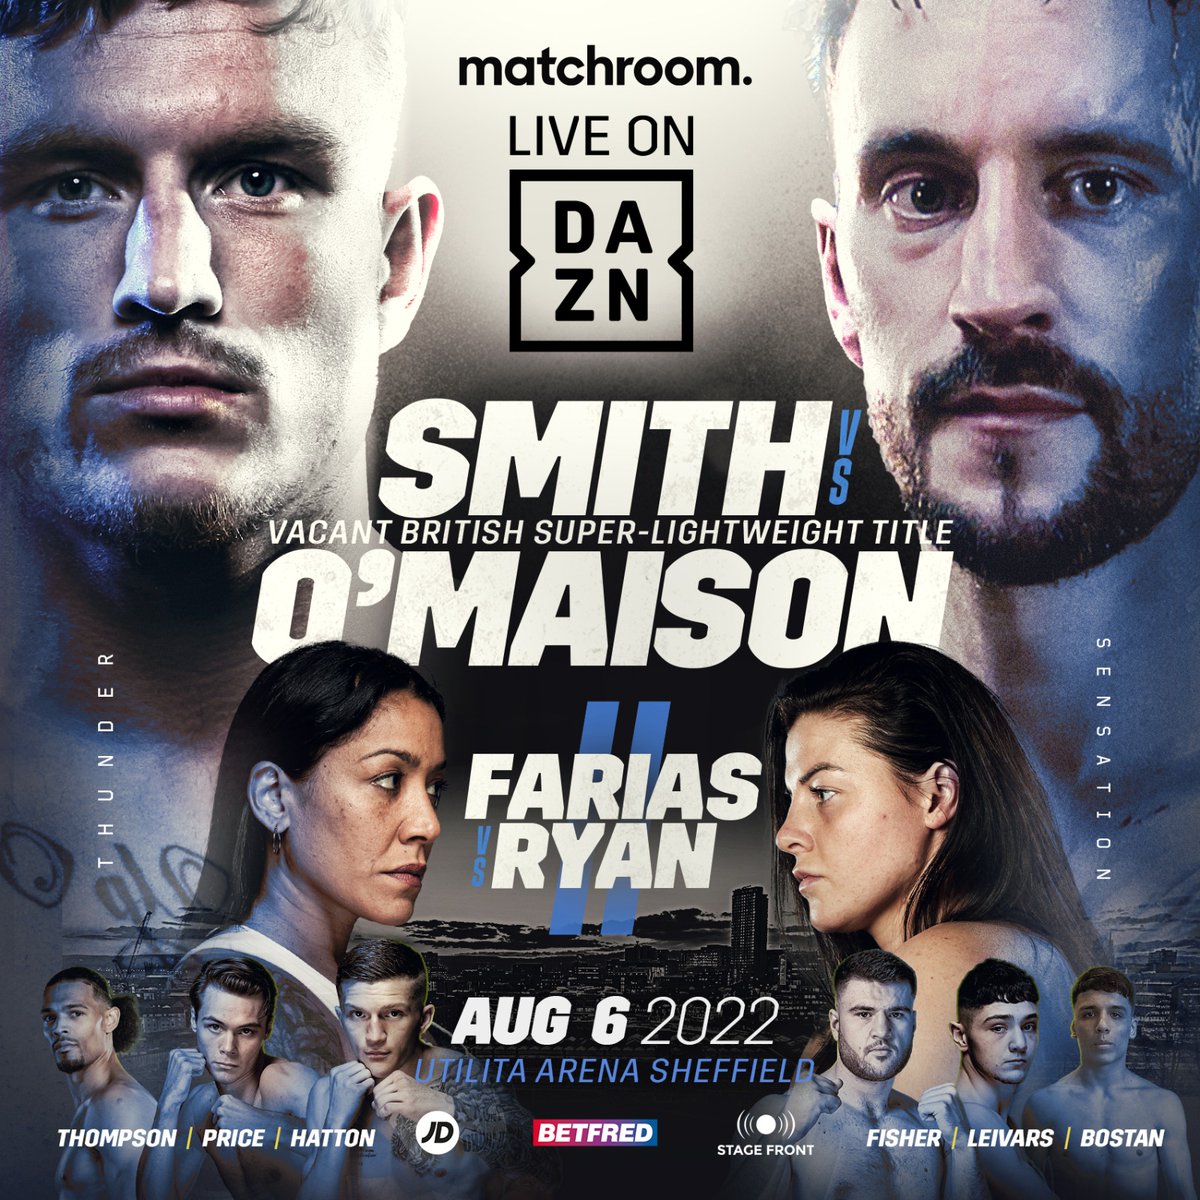 Dalton Smith will return to action on August 6